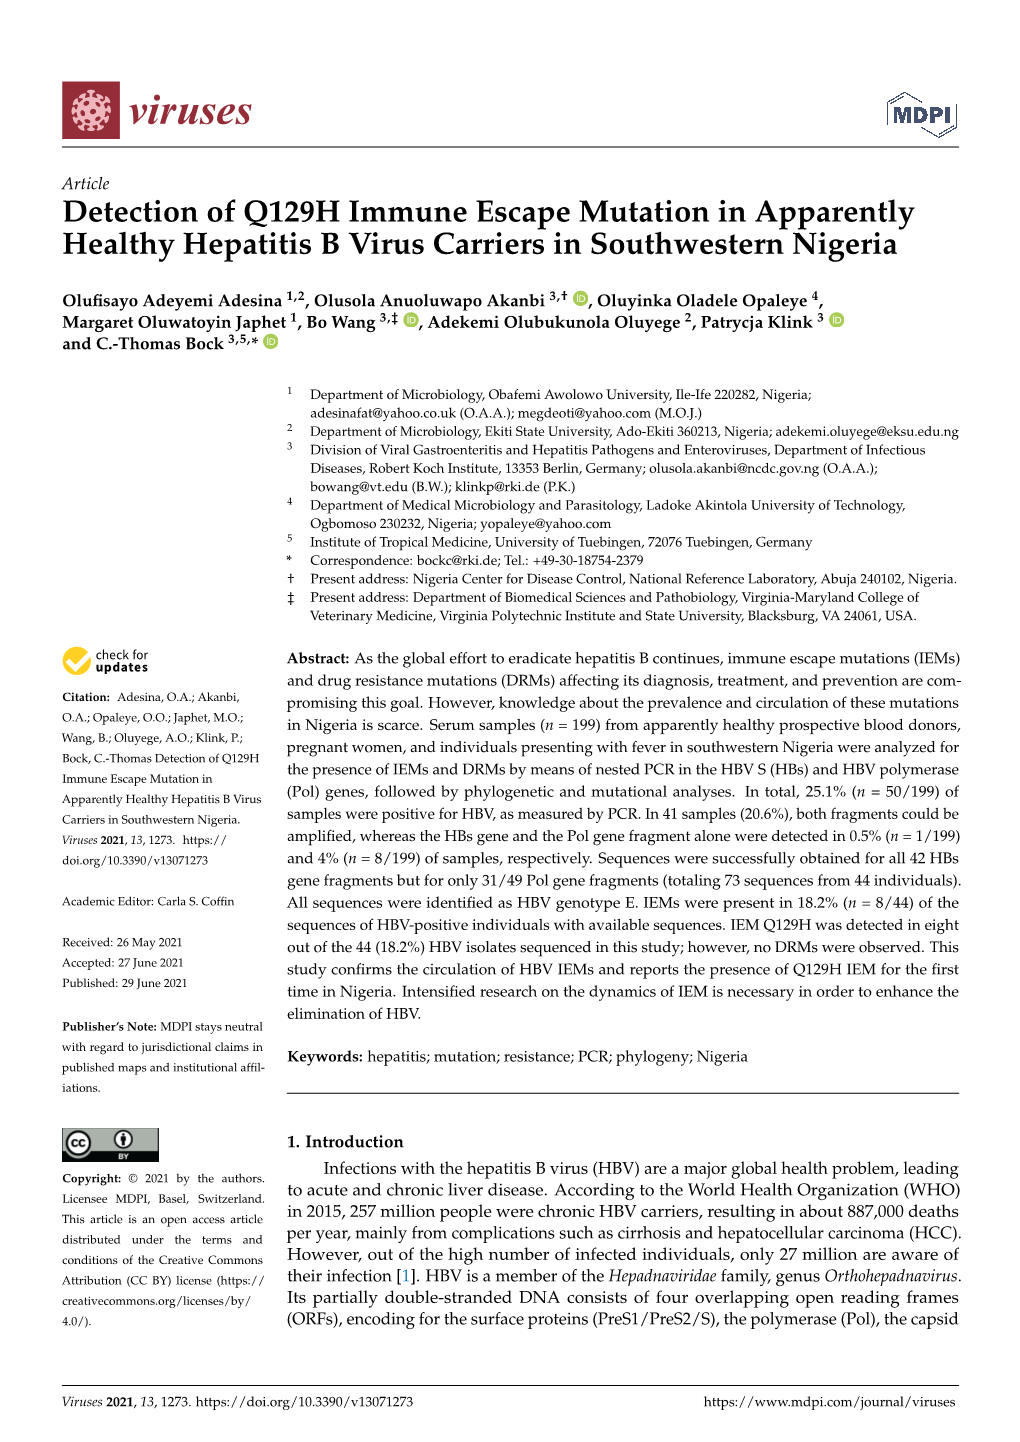 Detection of Q129H Immune Escape Mutation in Apparently Healthy Hepatitis B Virus Carriers in Southwestern Nigeria